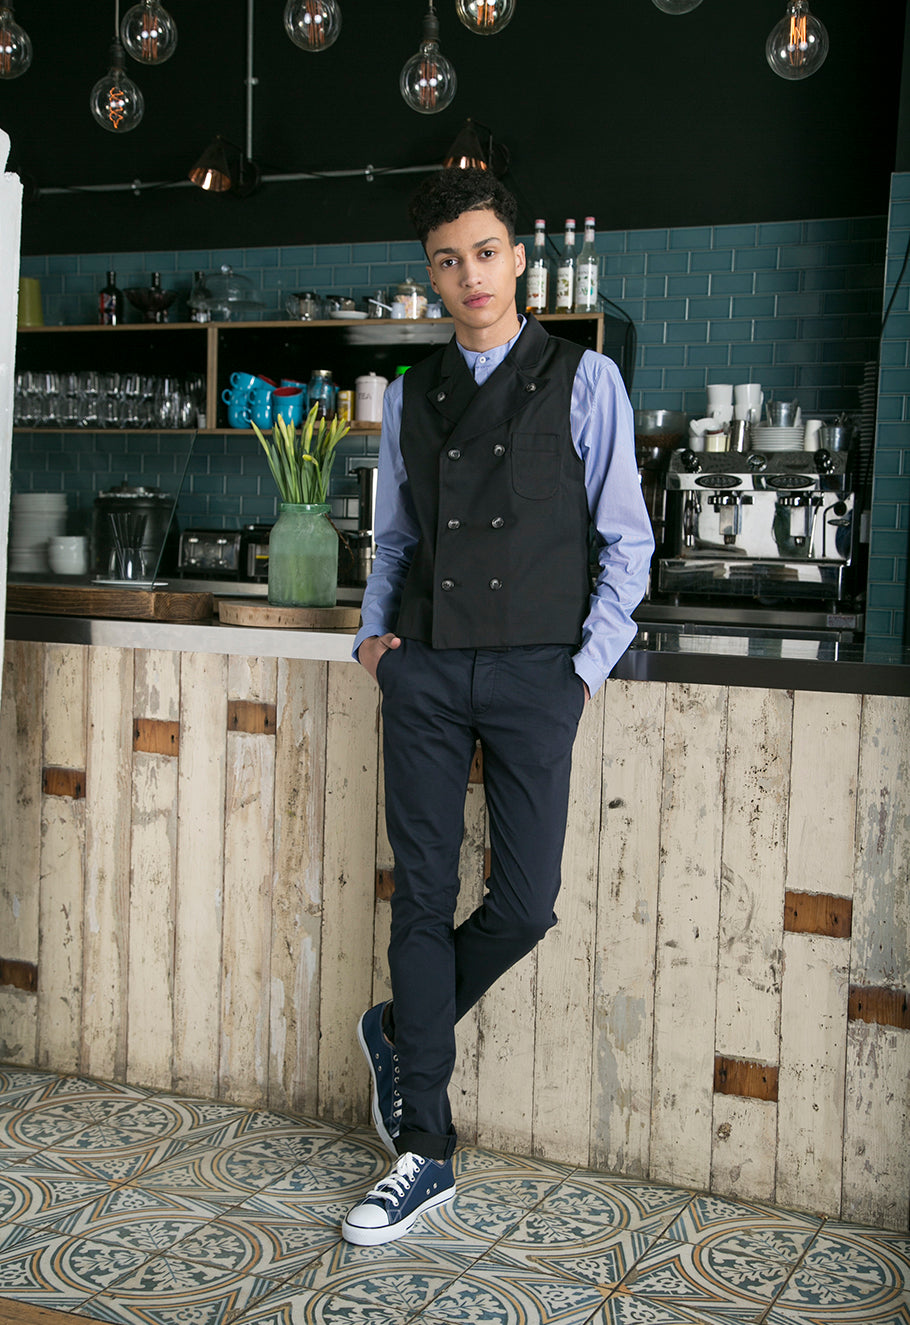 Male Double Breasted Waistcoat - Sale